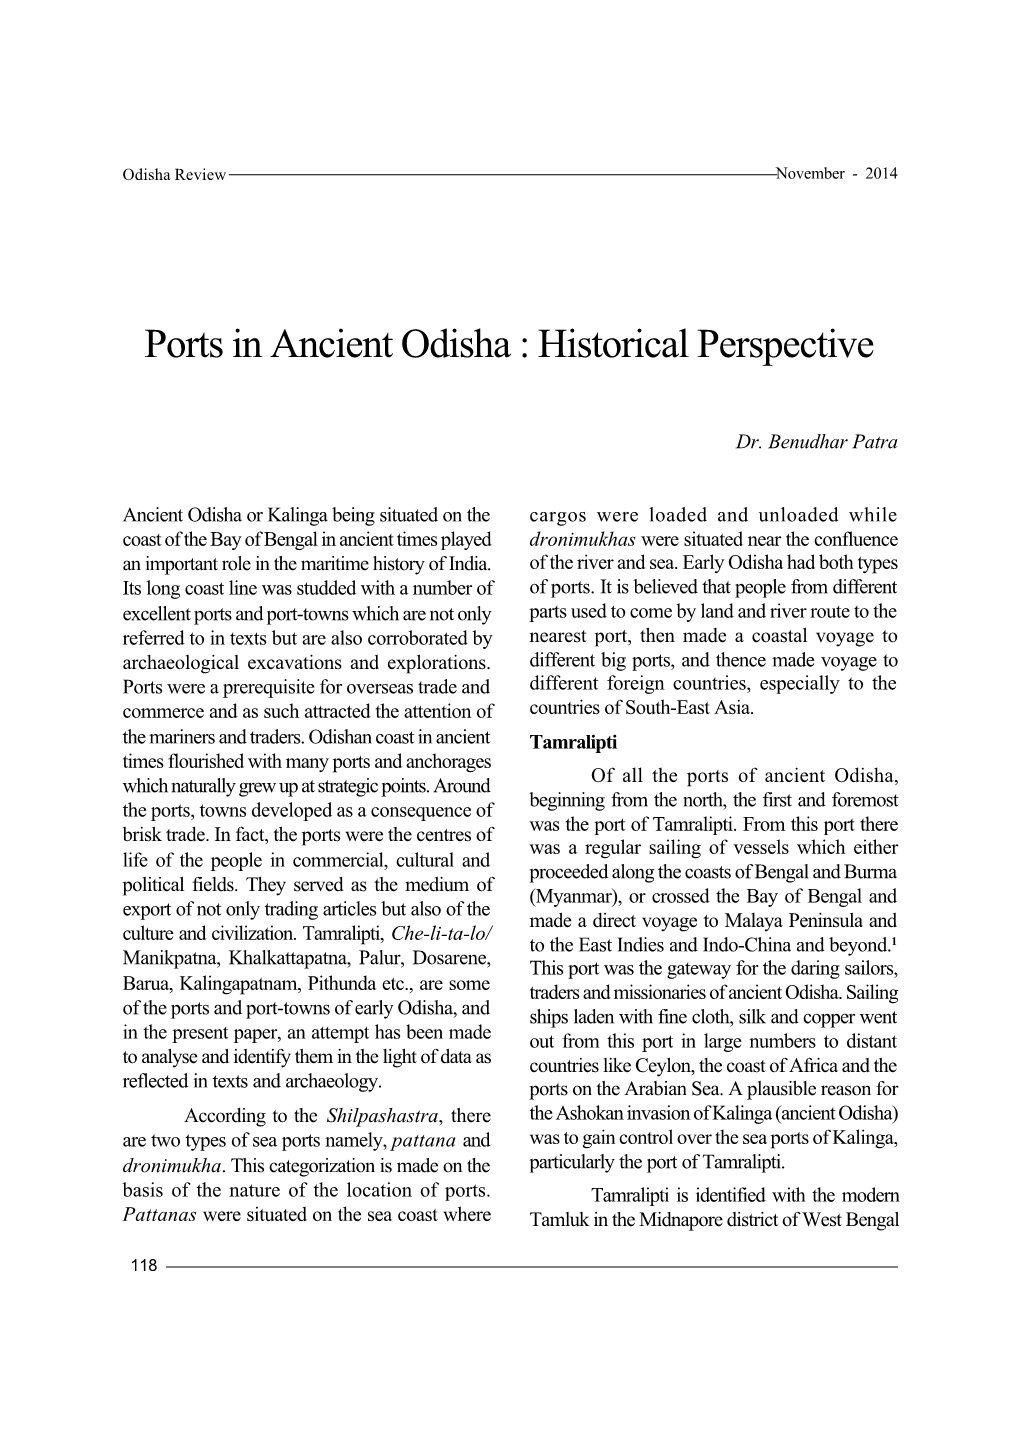 Ports in Ancient Odisha : Historical Perspective